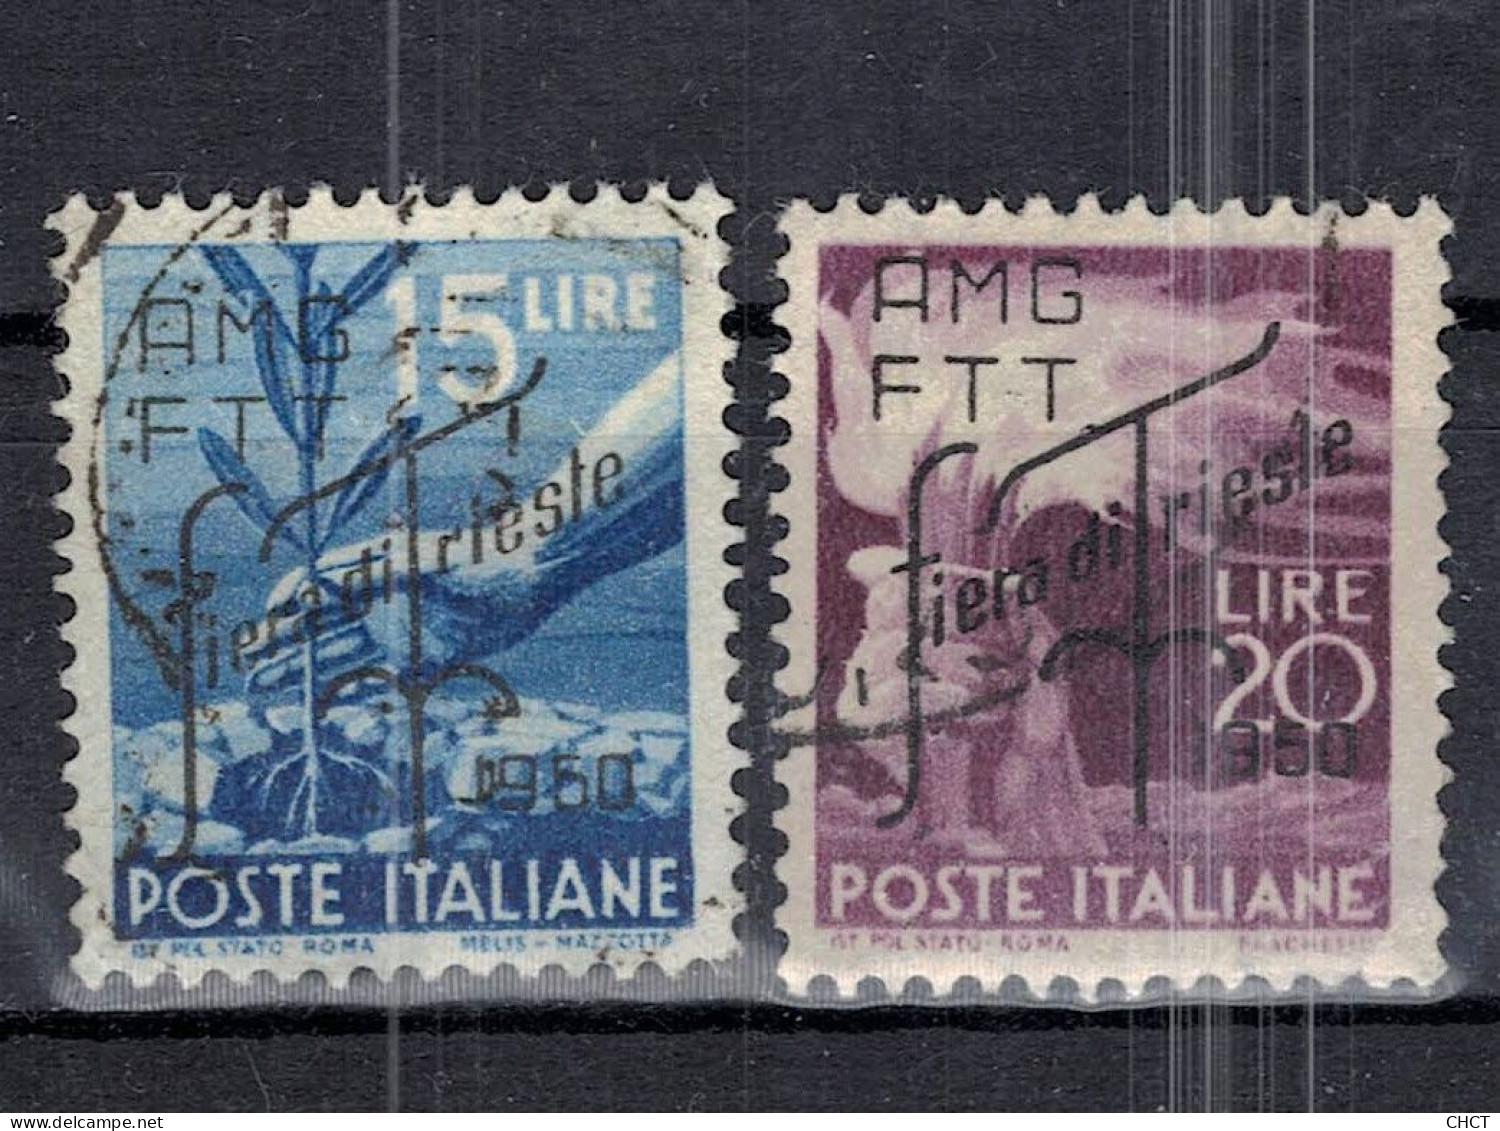 CHCT74 - Motives, AMG-FTT Overprint, Trieste A, 1950, Complete Series, Italy - Usati